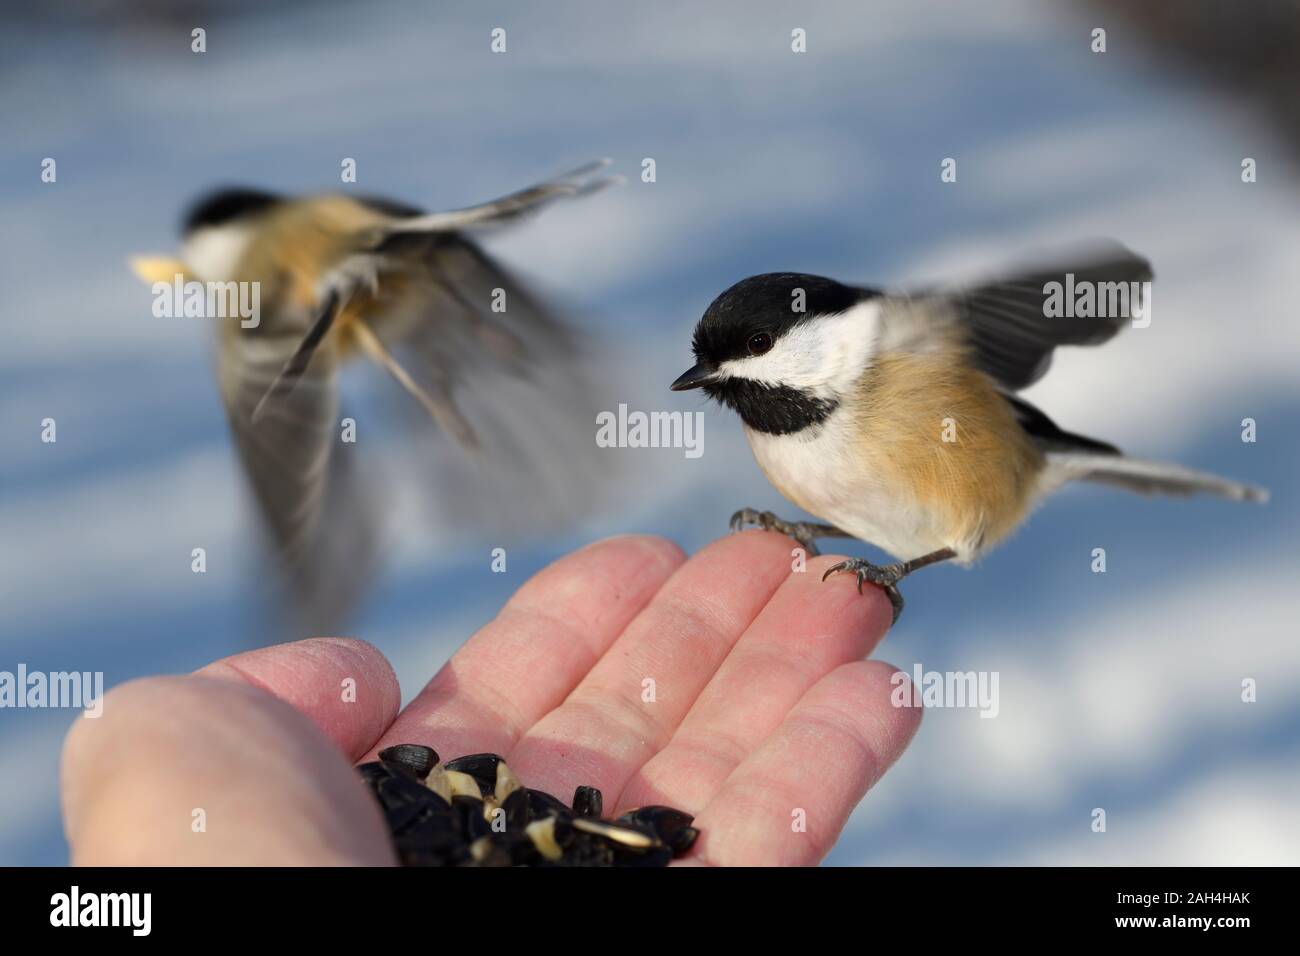 Flying Black Capped Chickadees with with orange feathers at hand of man with sunflower seeds and peanuts in a snowy Toronto forest in winter Stock Photo